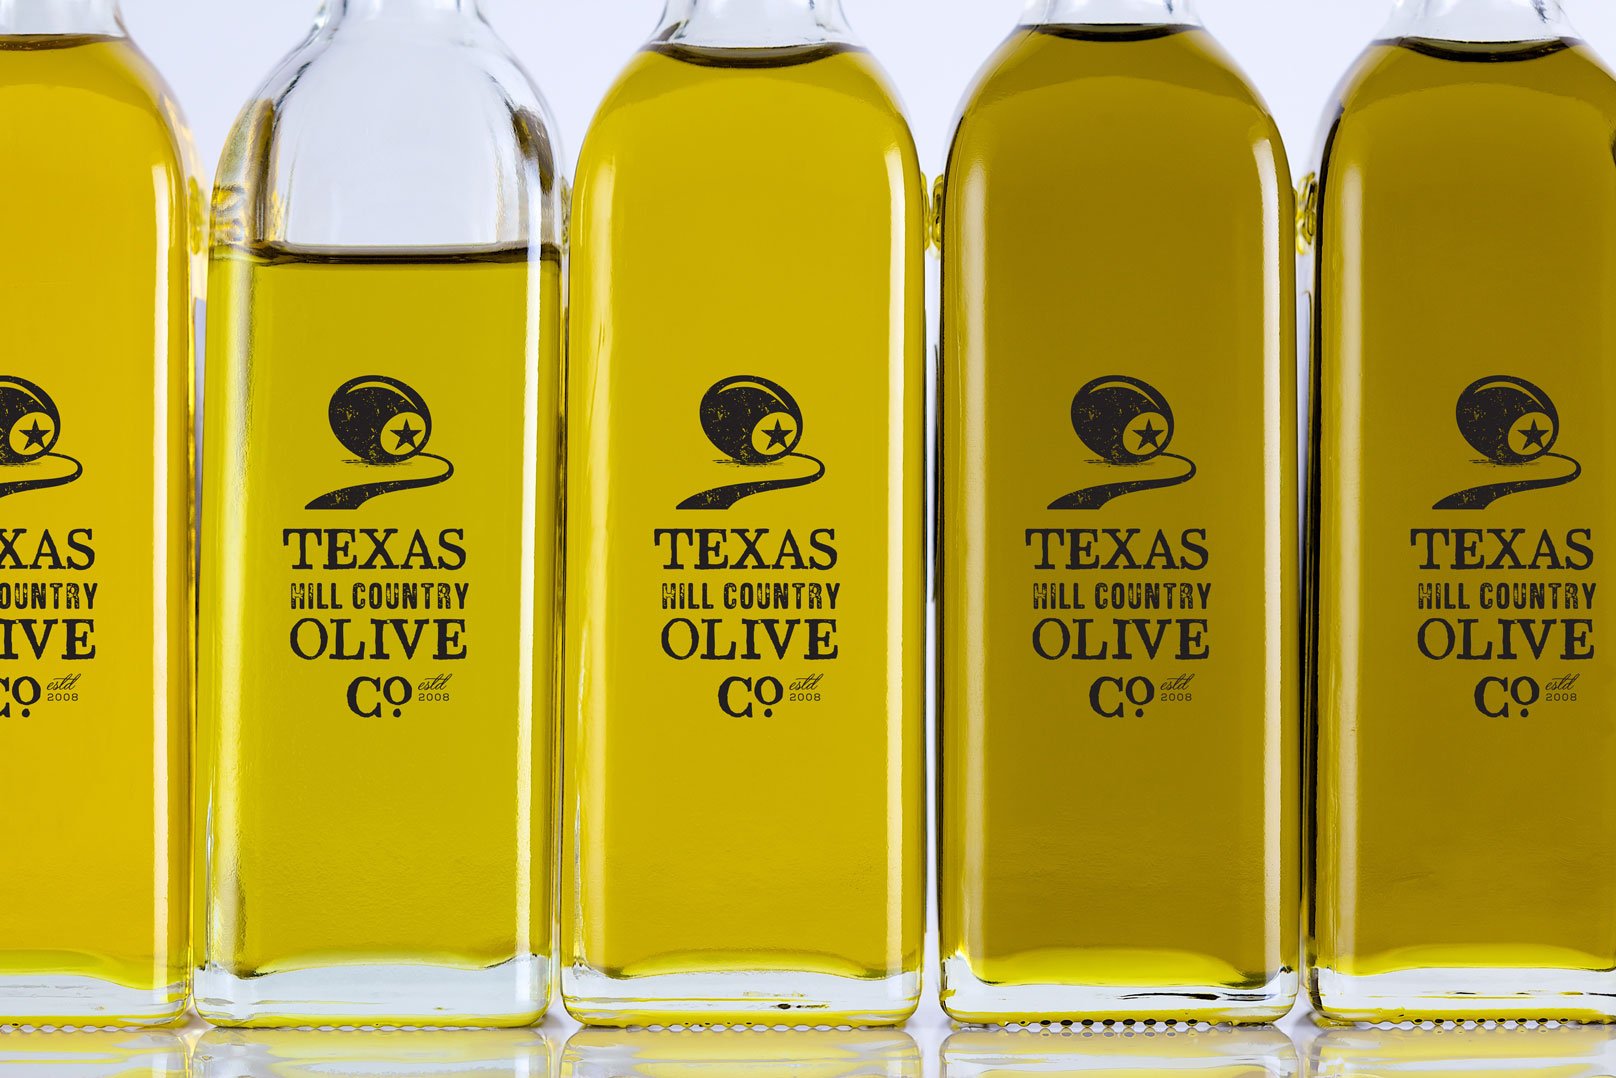 5 Insights Into Selecting High Quality Olive Oil - Texas Hill Country Olive Co.